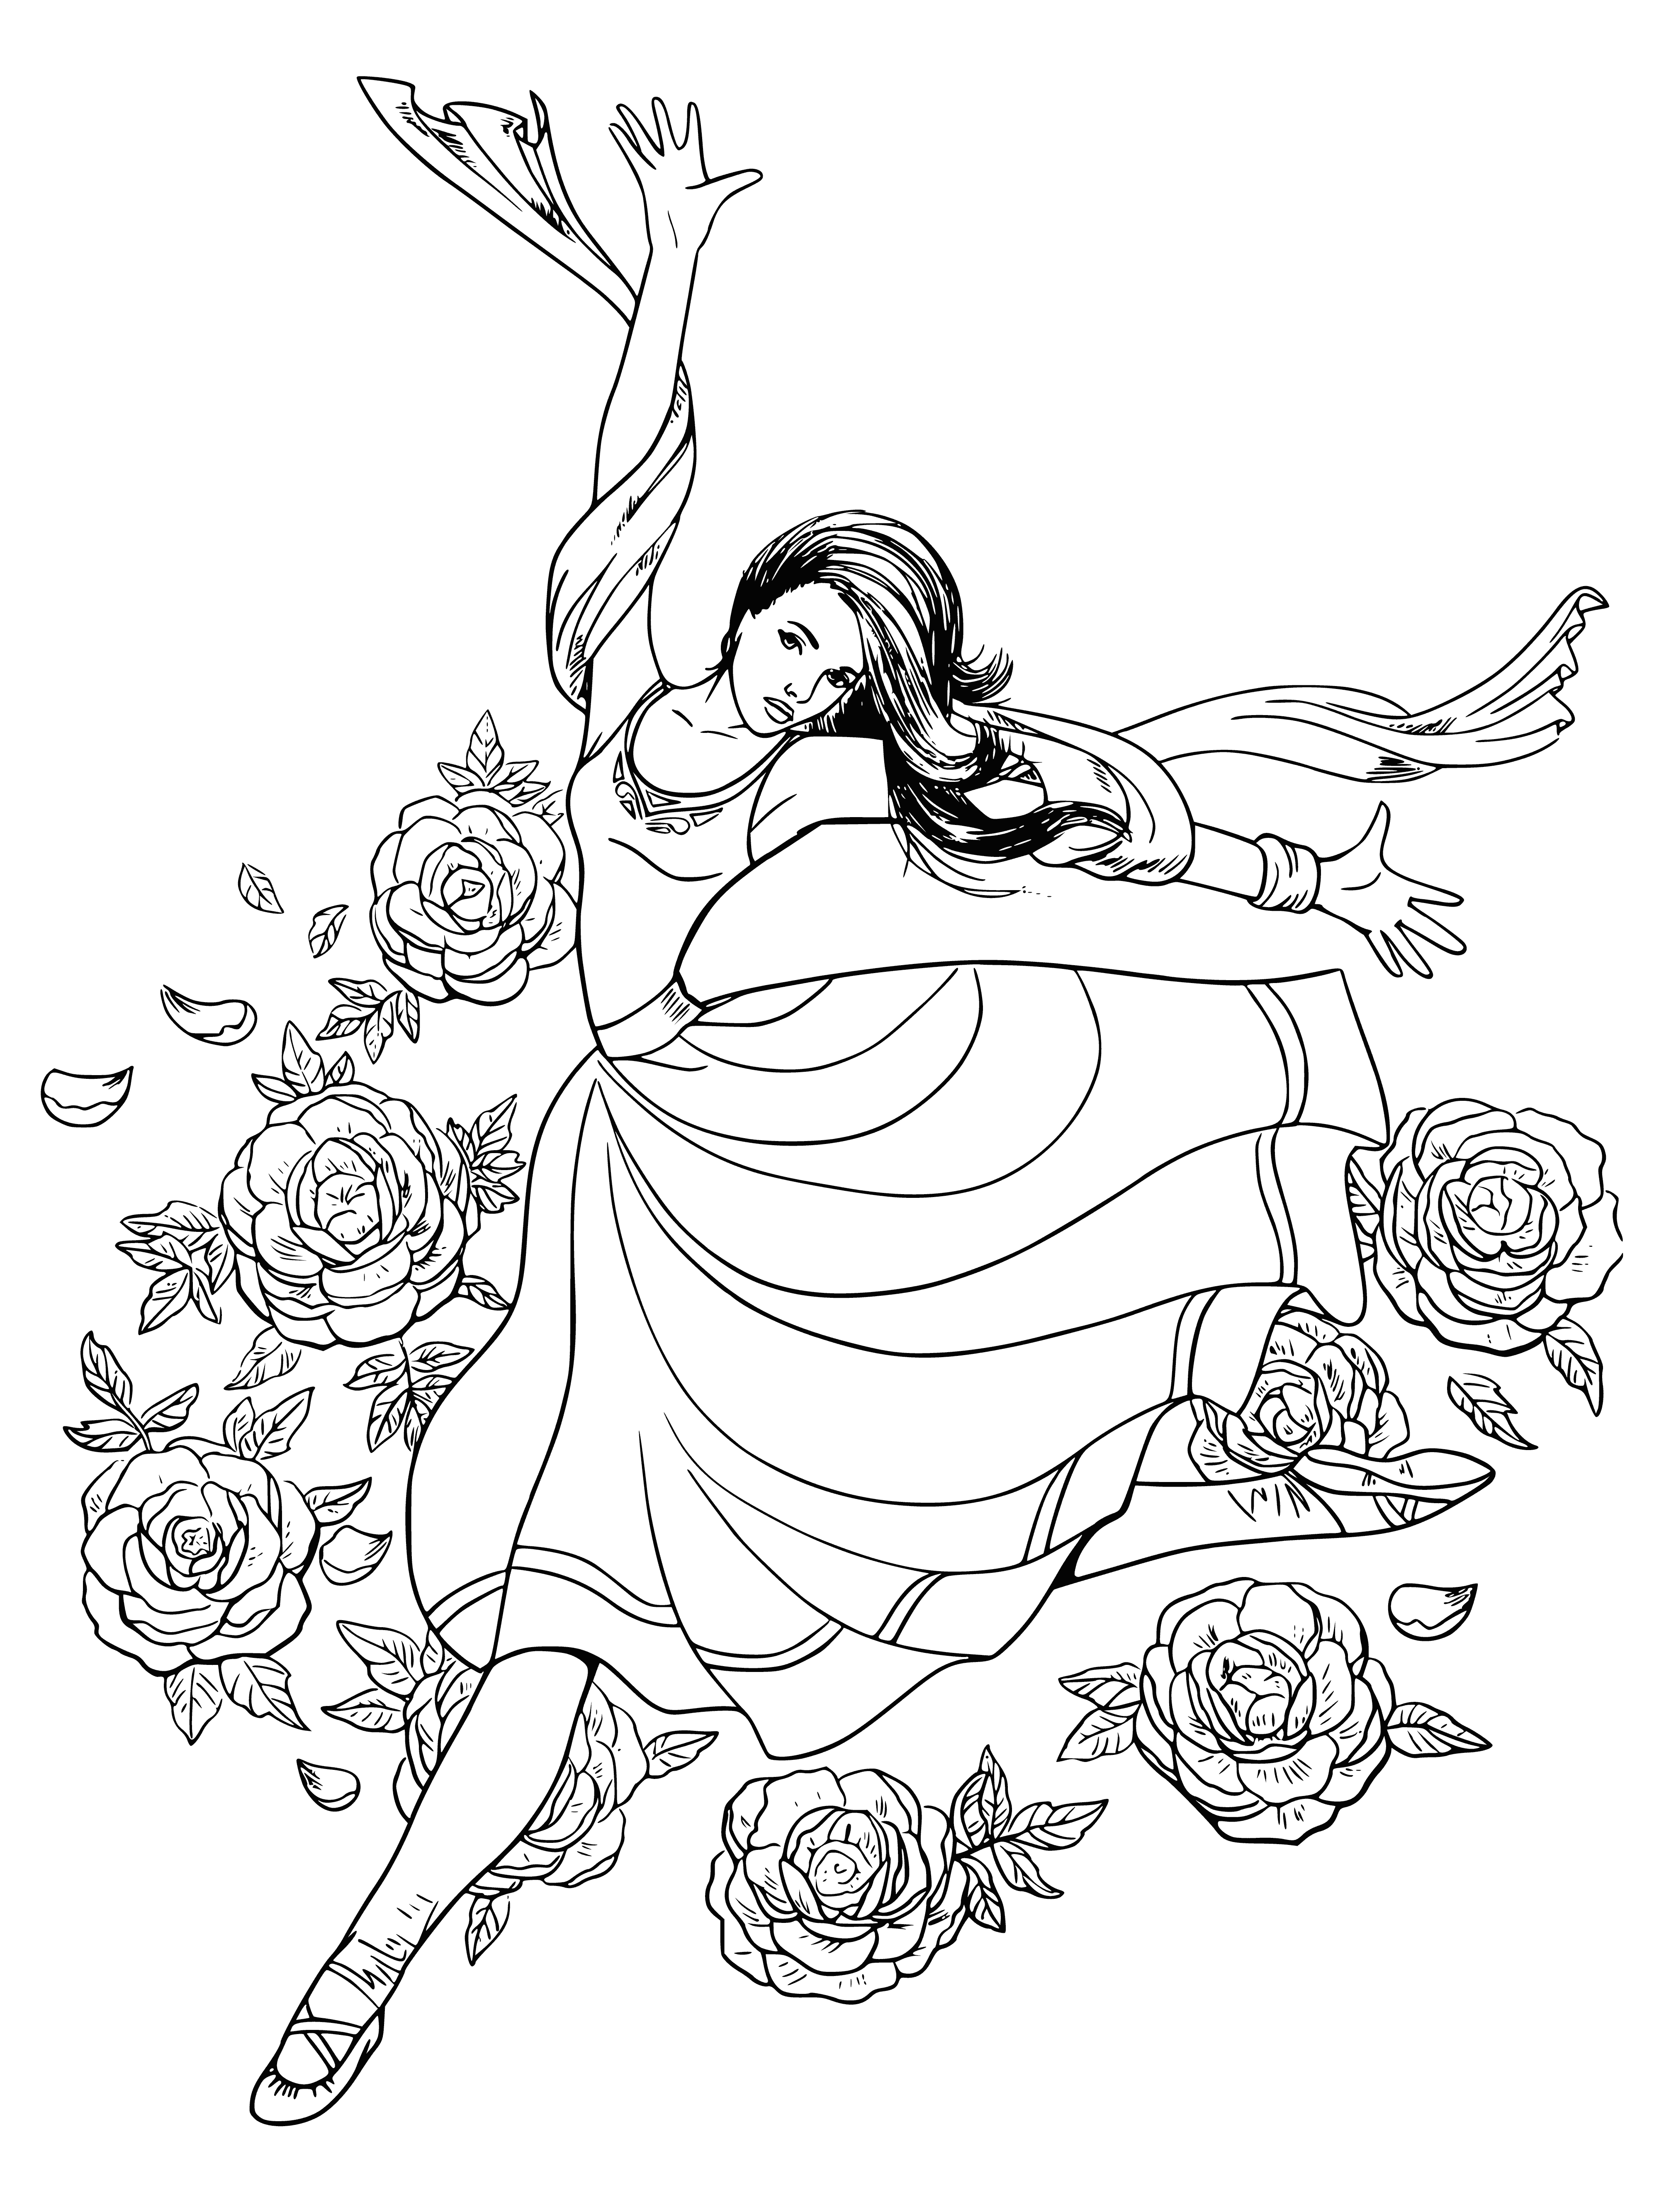 coloring page: Ballerinas in tutus and buns jump in the air amongst a colorful background.